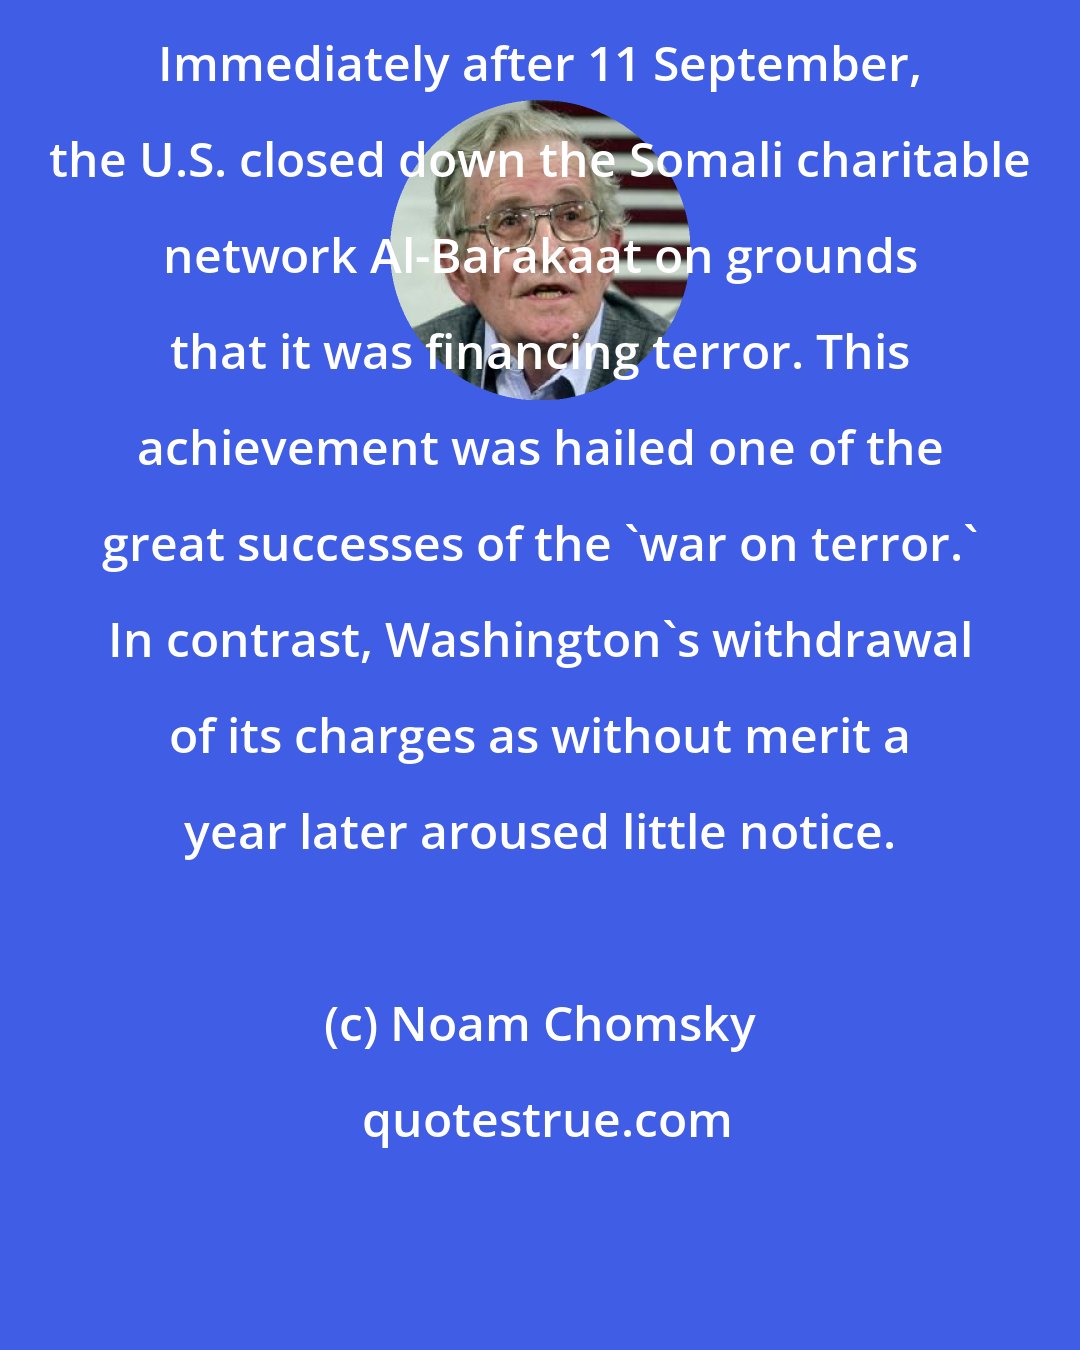 Noam Chomsky: Immediately after 11 September, the U.S. closed down the Somali charitable network Al-Barakaat on grounds that it was financing terror. This achievement was hailed one of the great successes of the 'war on terror.' In contrast, Washington's withdrawal of its charges as without merit a year later aroused little notice.